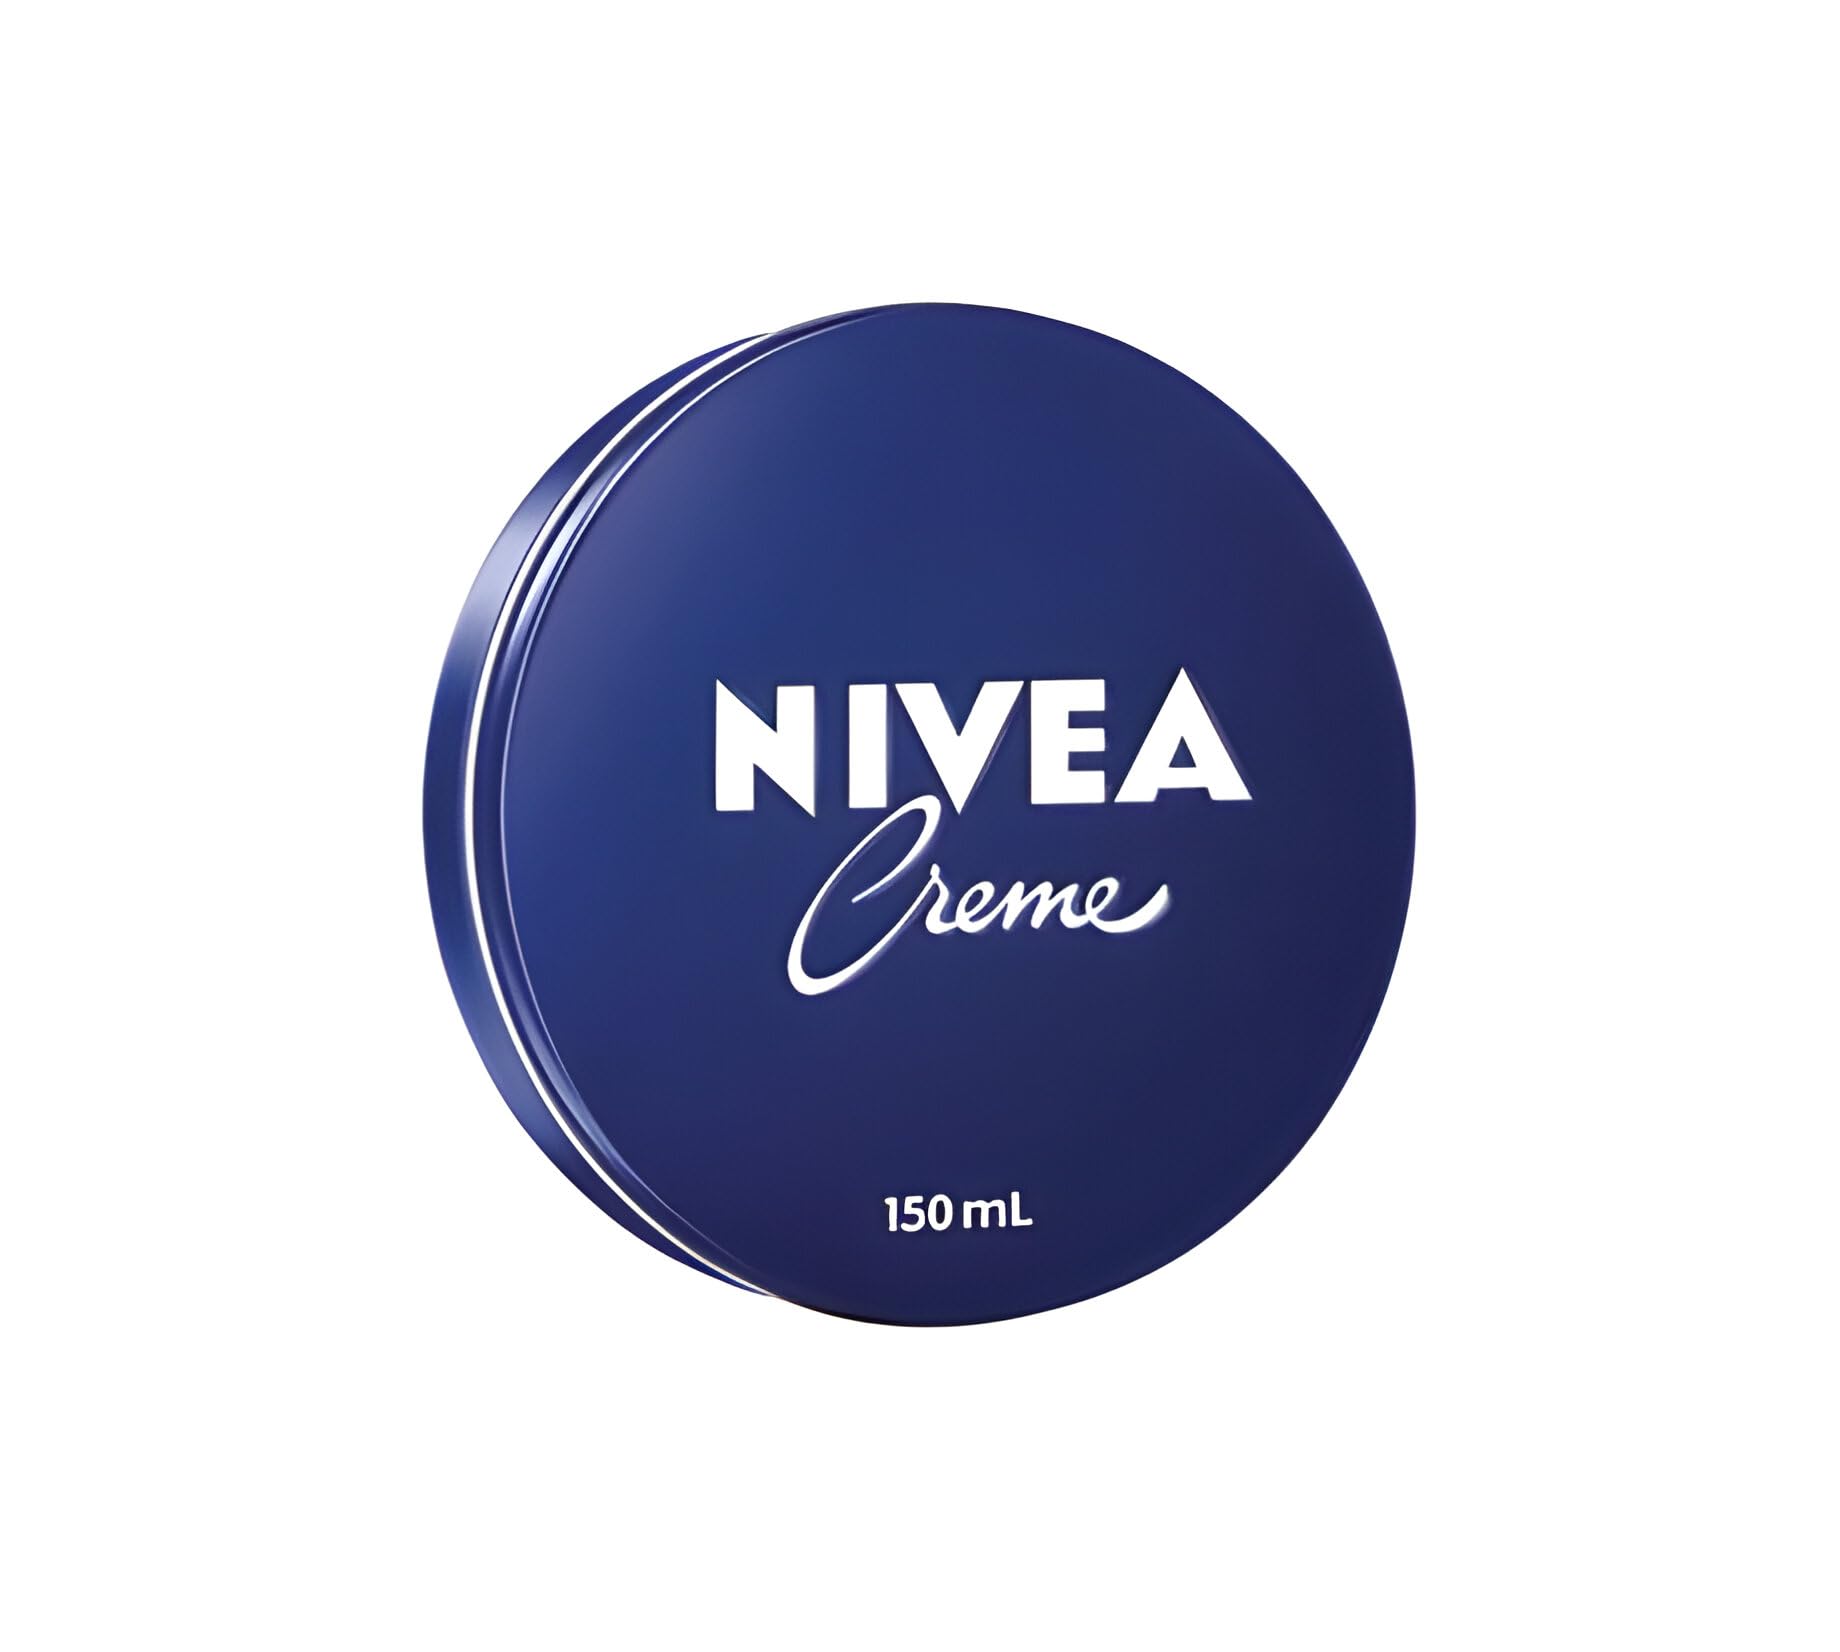 NIVEA CREME Universal Cream Intensive Care Moisturising Care With Eucerit for Hands, Body, and Face for Instant Hydration and Daily Use, 150ml, Pack of 6